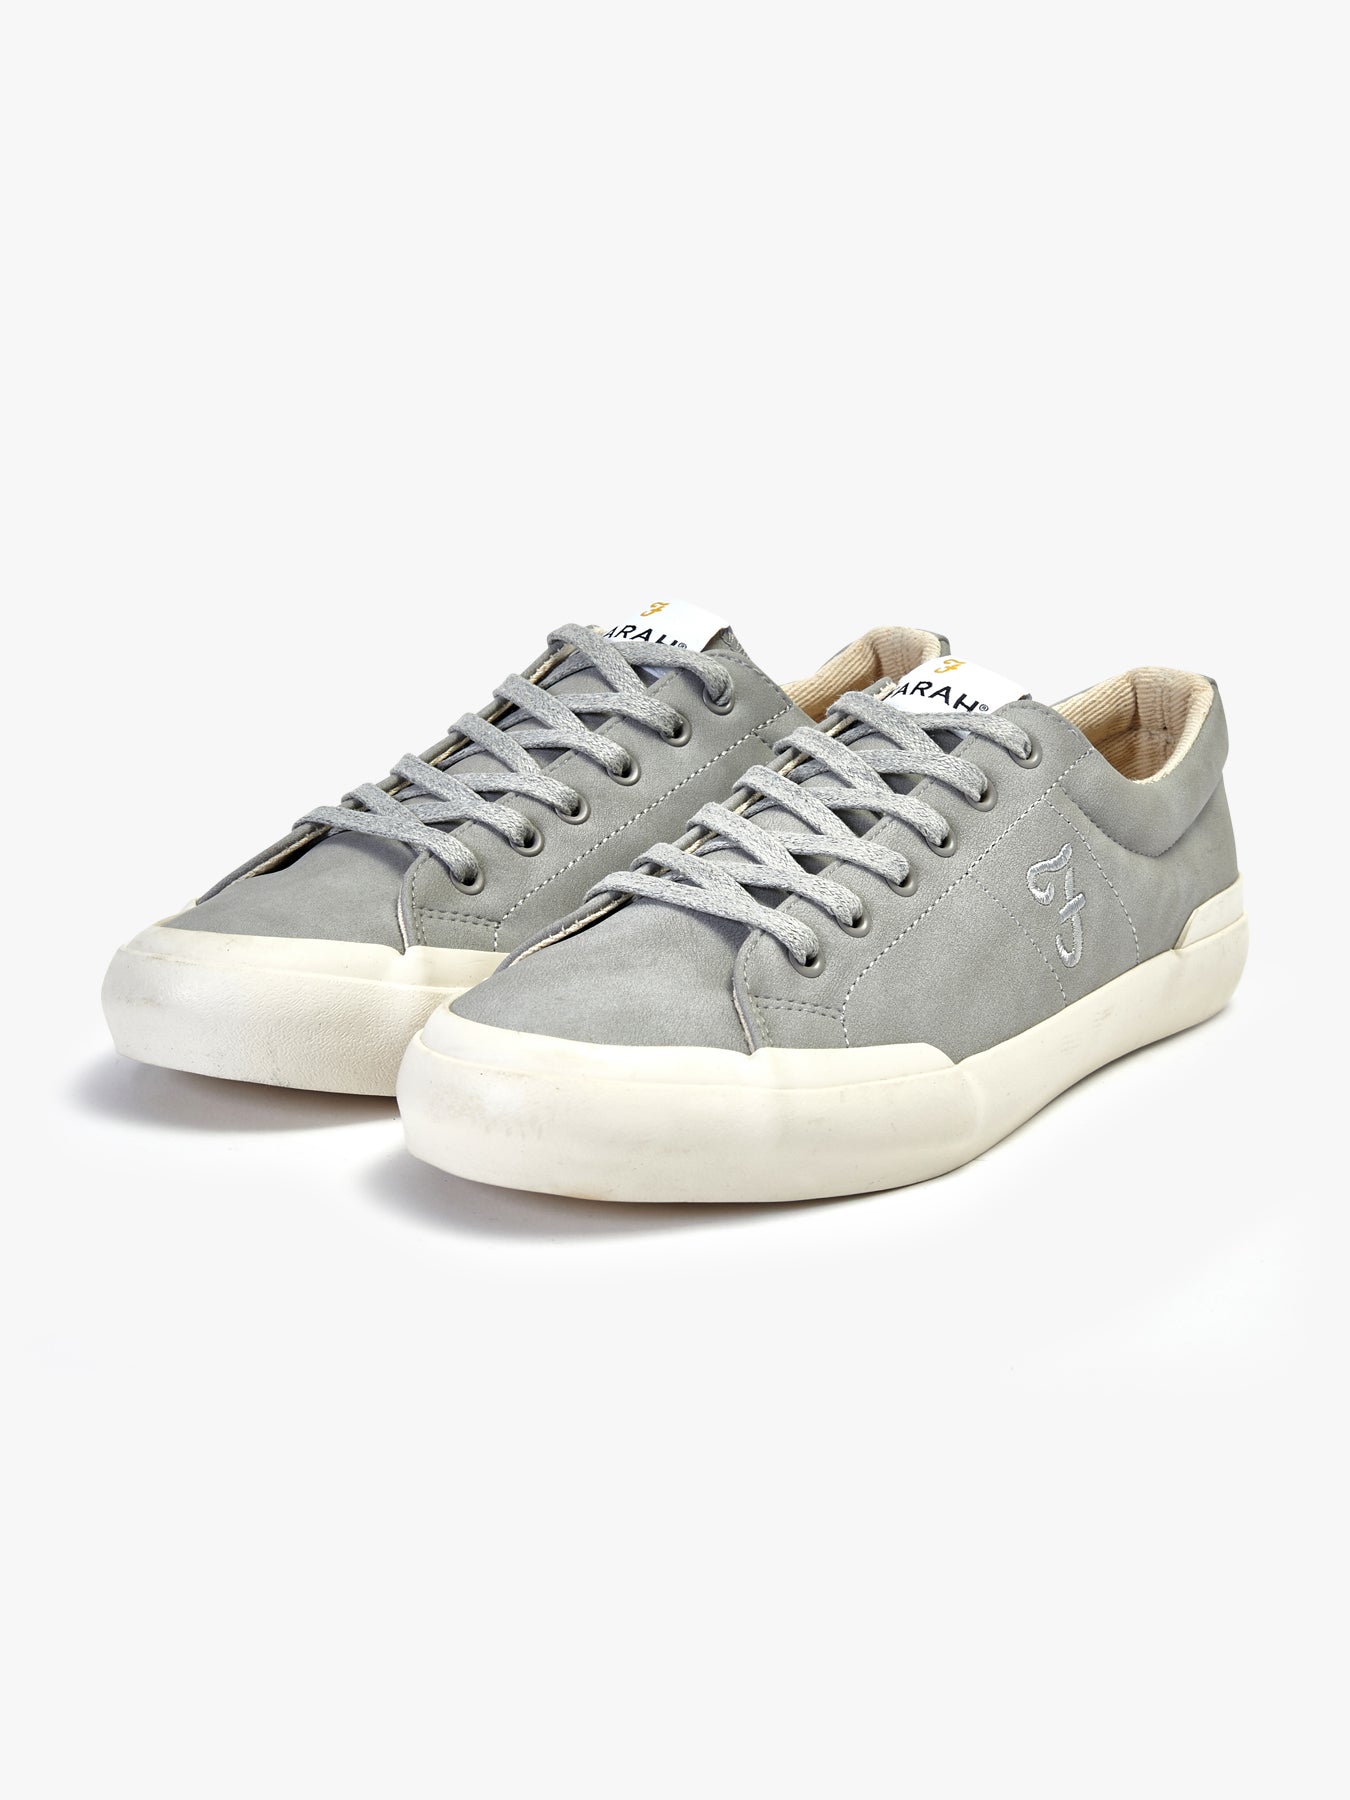 View Dallas Leather Trainer In Grey information